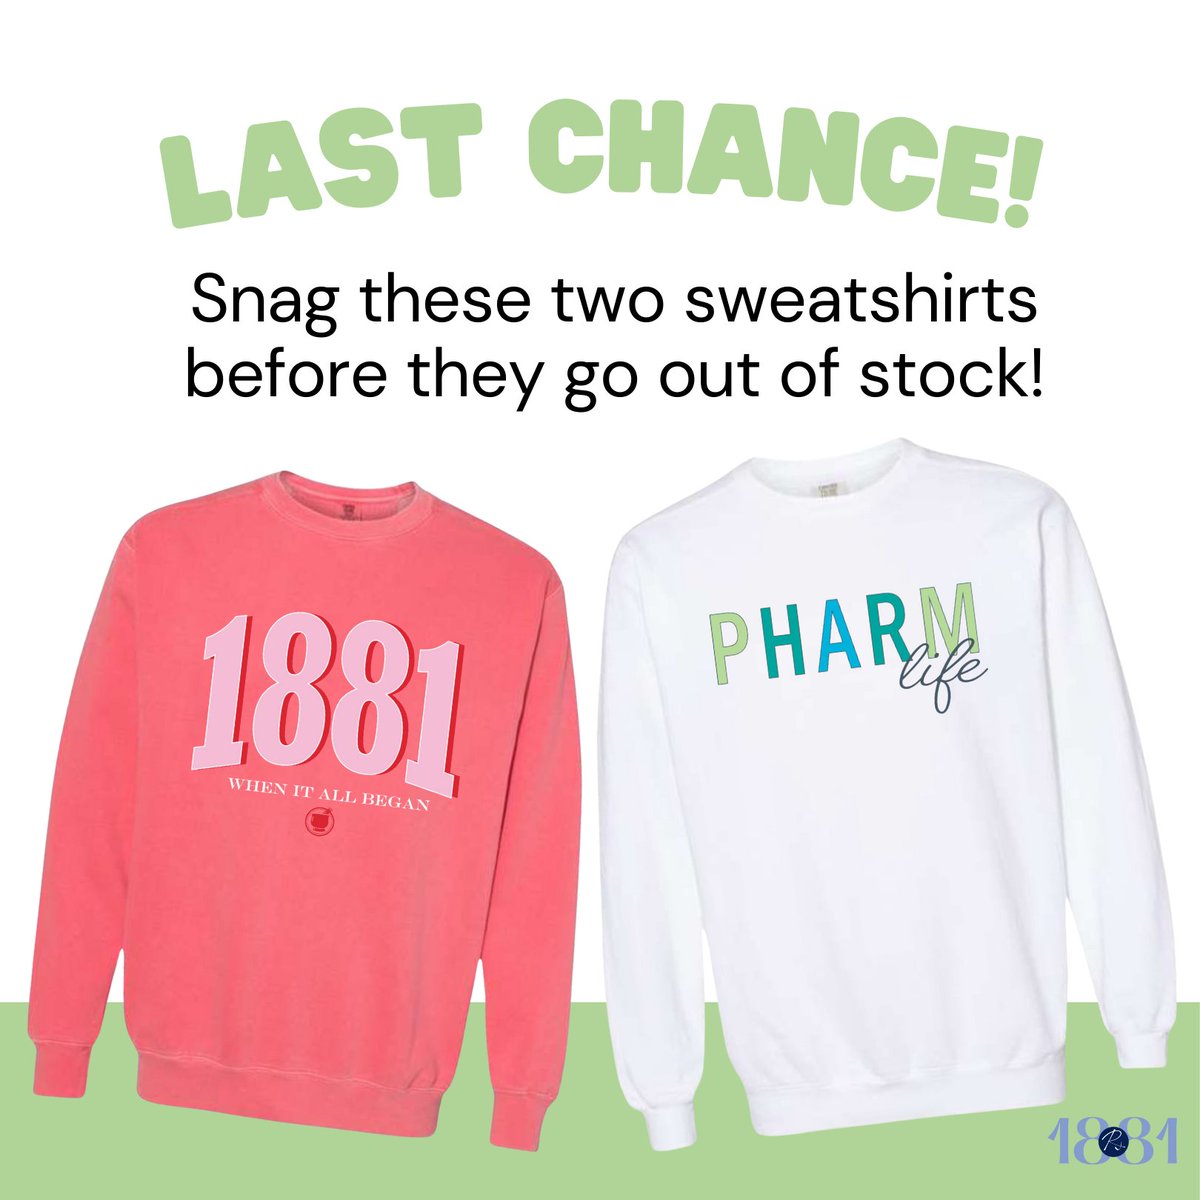 Last chance! Once they are gone these two sweatshirts will not be reordered. Get them while they’re still in stock! 1881rx.square.site/s/shop